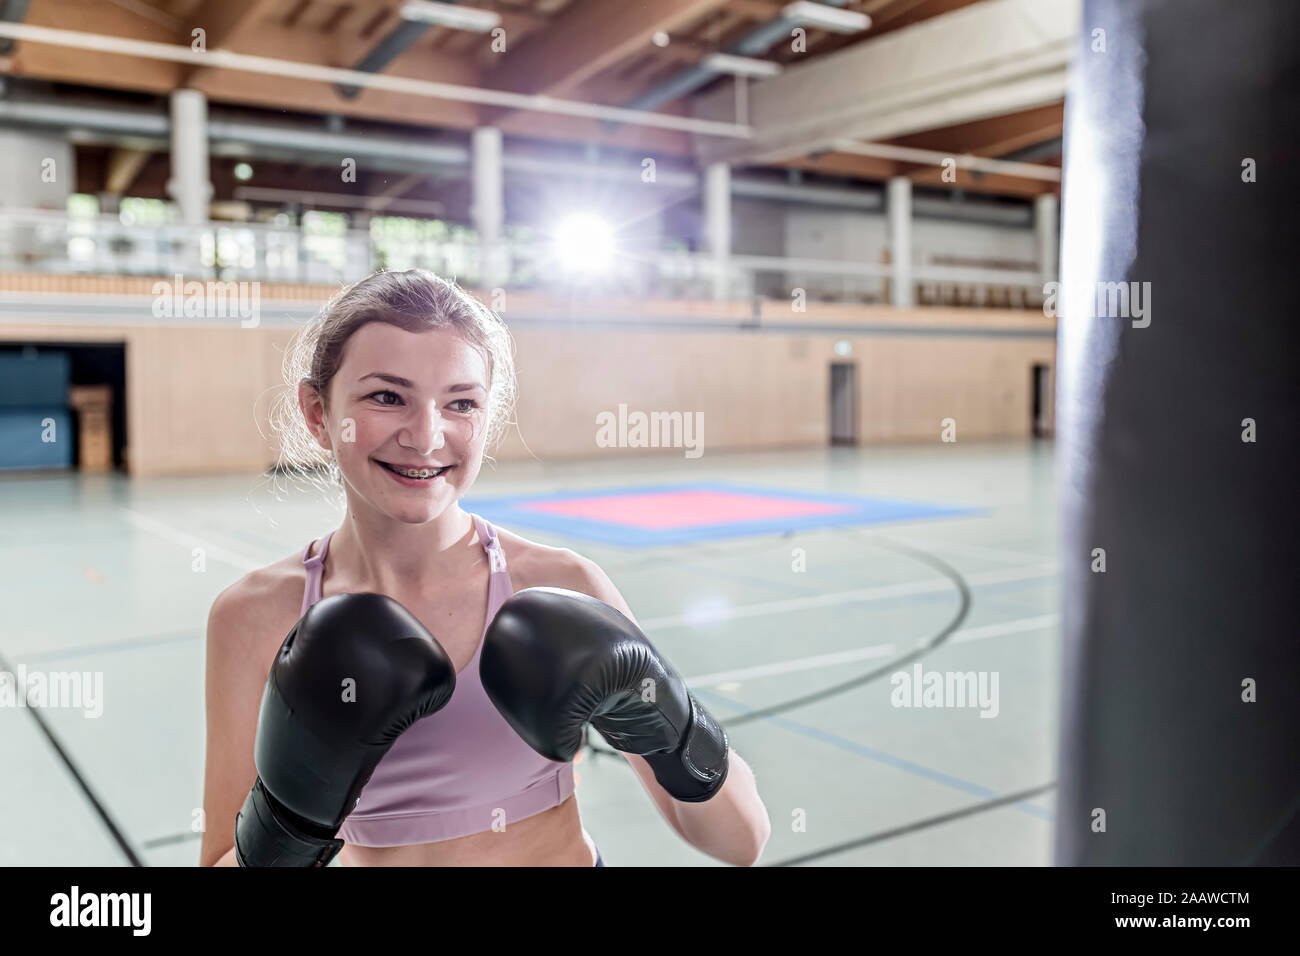 Smiling female boxer practising at punchbag in sports hall Stock Photo